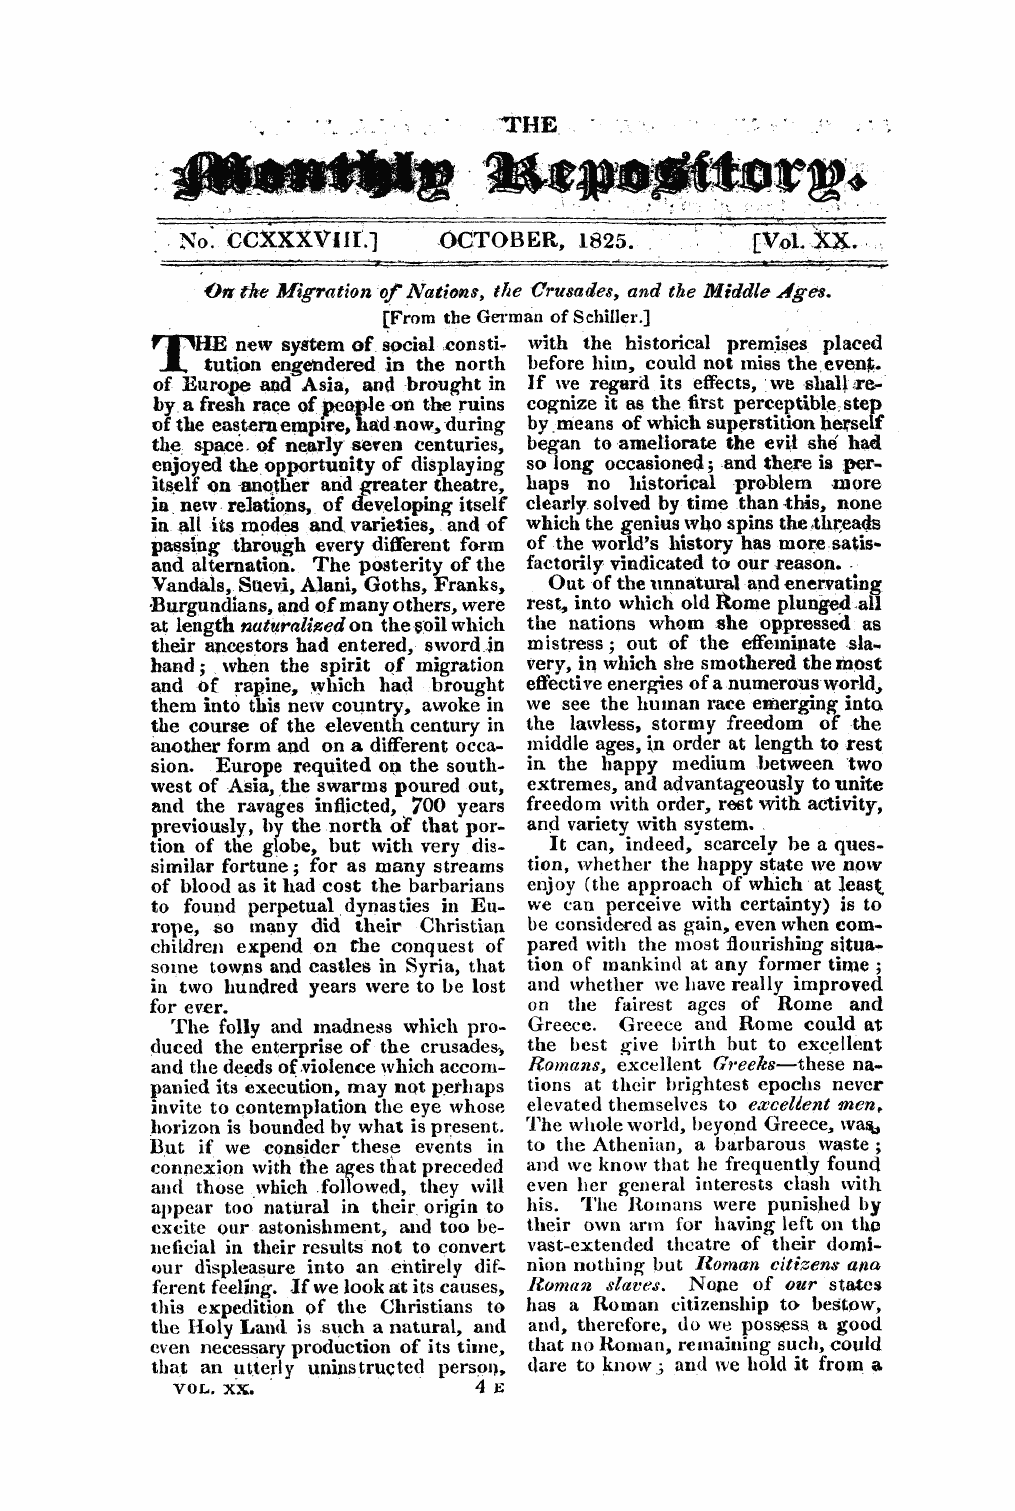 Monthly Repository (1806-1838) and Unitarian Chronicle (1832-1833): F Y, 1st edition - On The Migration Of Nations, The Crusades, And The Middle Ages [From The German Of Schiller.]